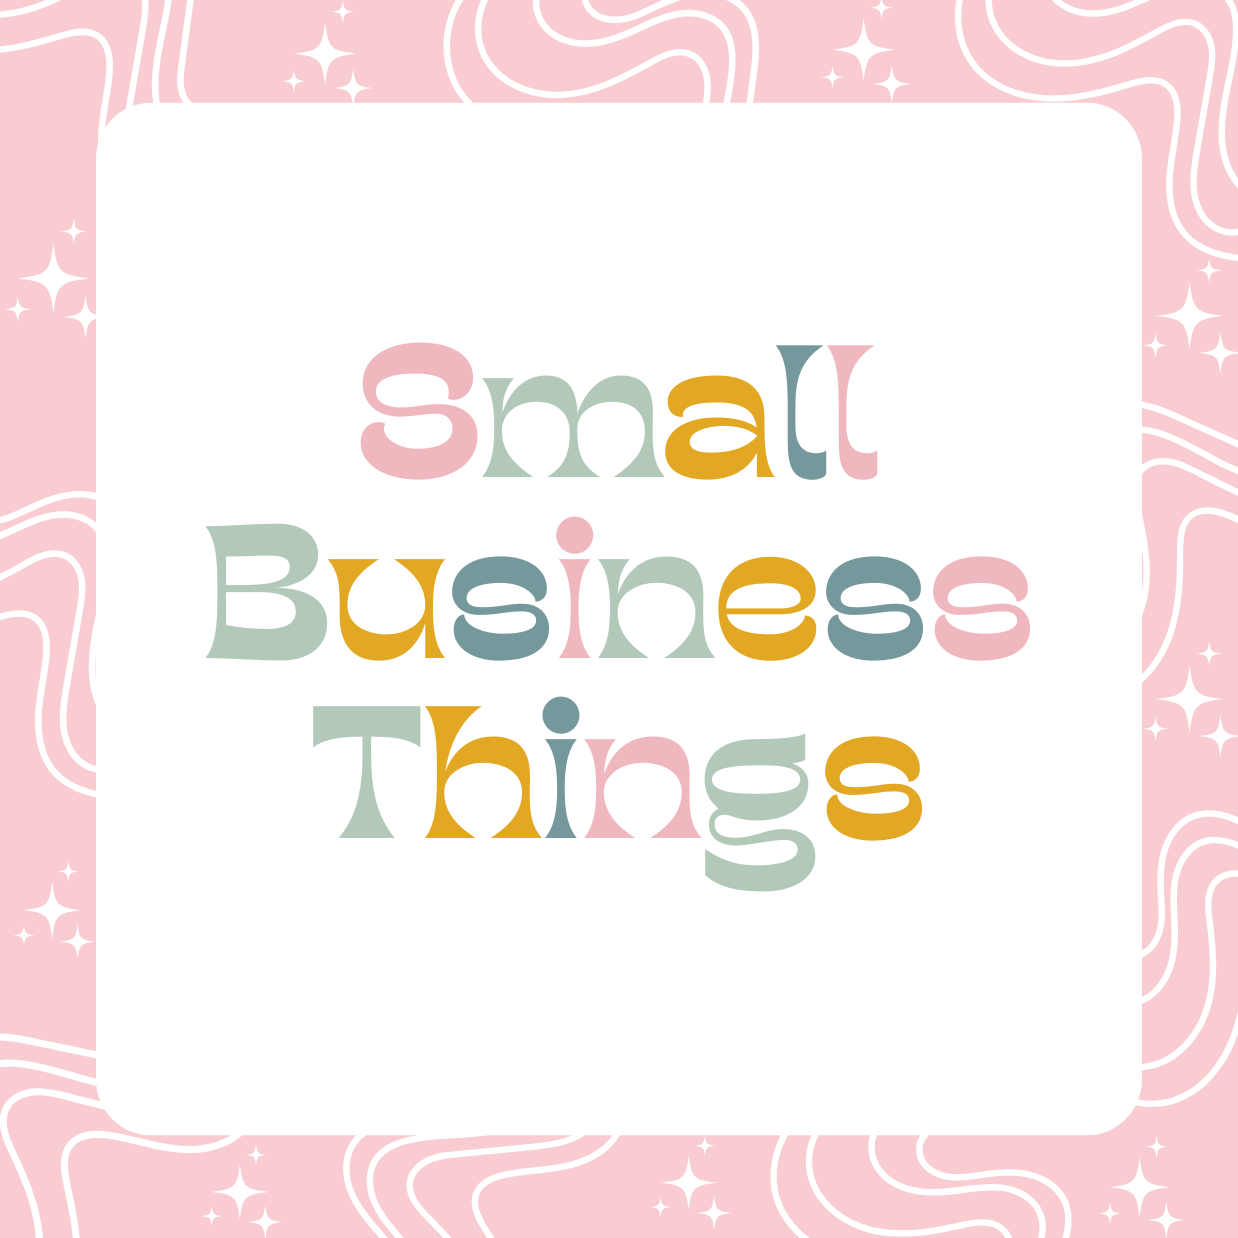 Small Business Things